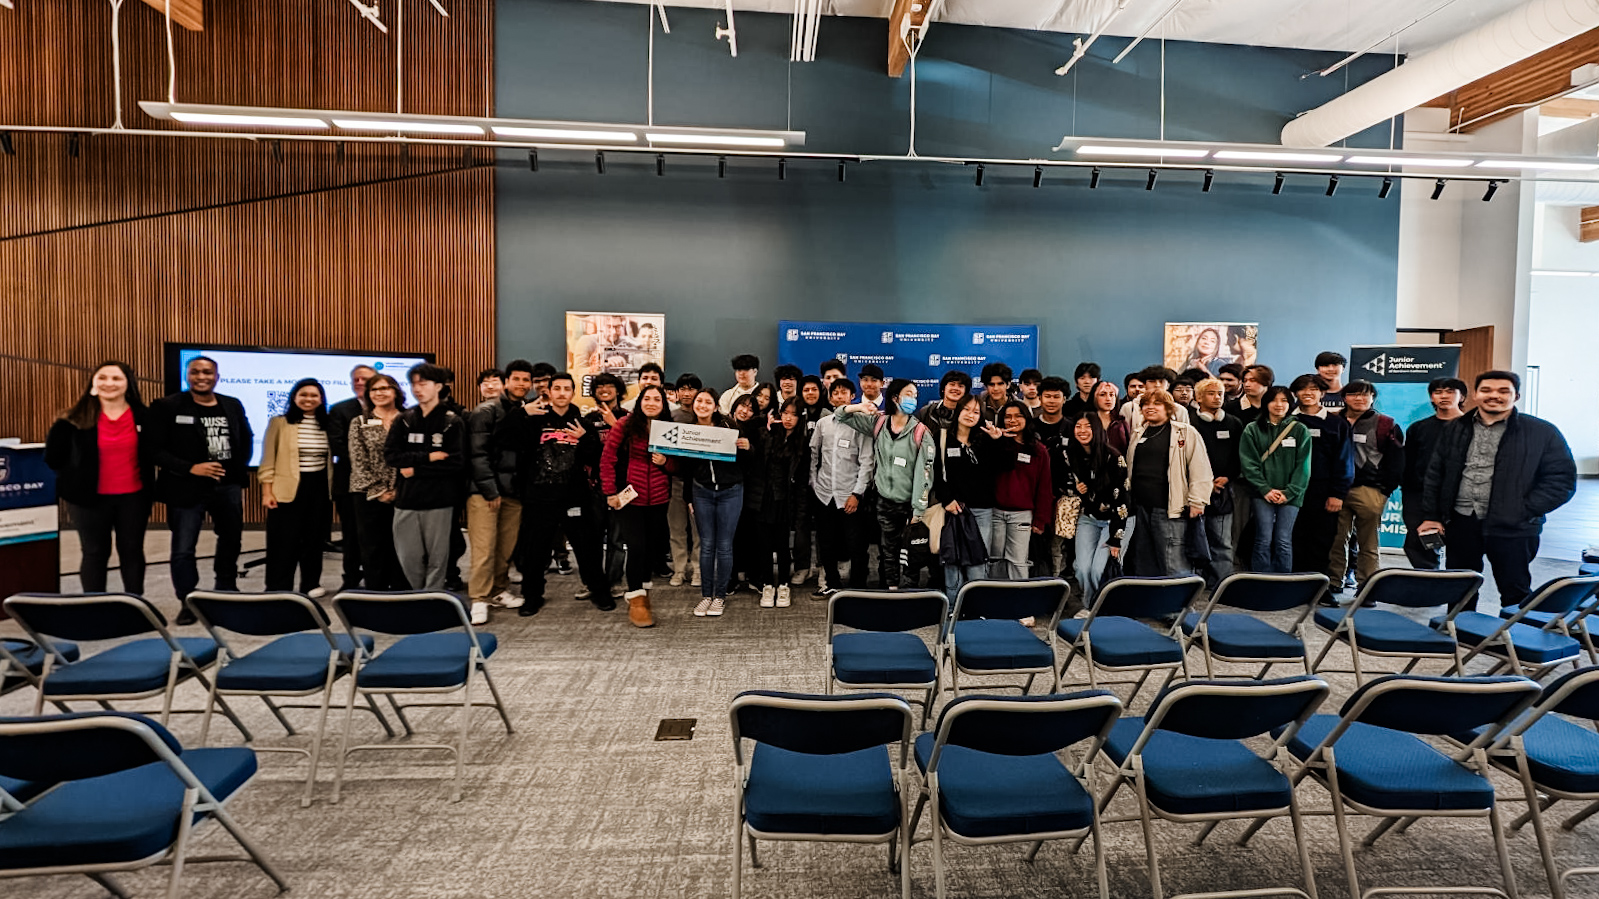 San Francisco Bay University and Junior Achievement hosted the first Careers in Gaming Summit. The event saw 70 local high schoolers and 20 SFBU students attend.